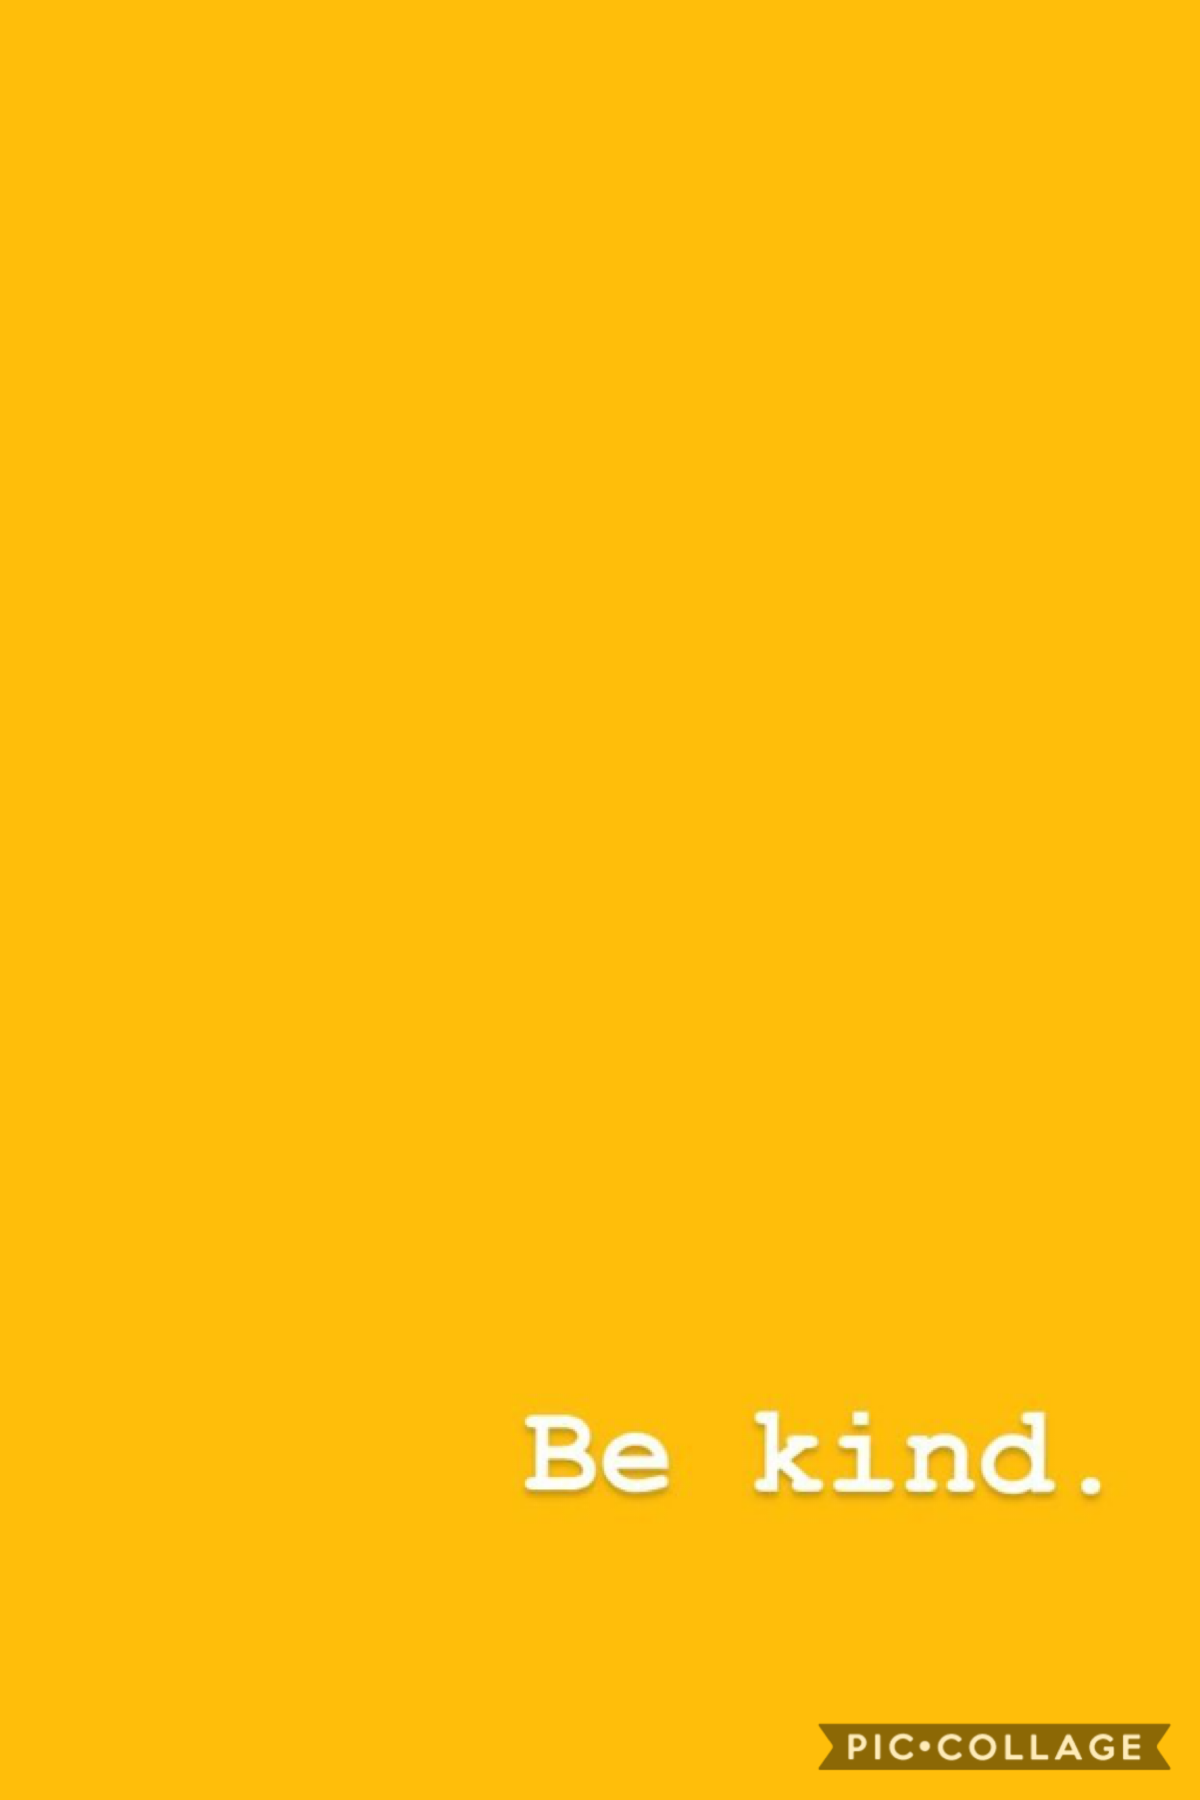 When given the choice between being right and being kind, choose kind. -Mr Brown (Wonder)